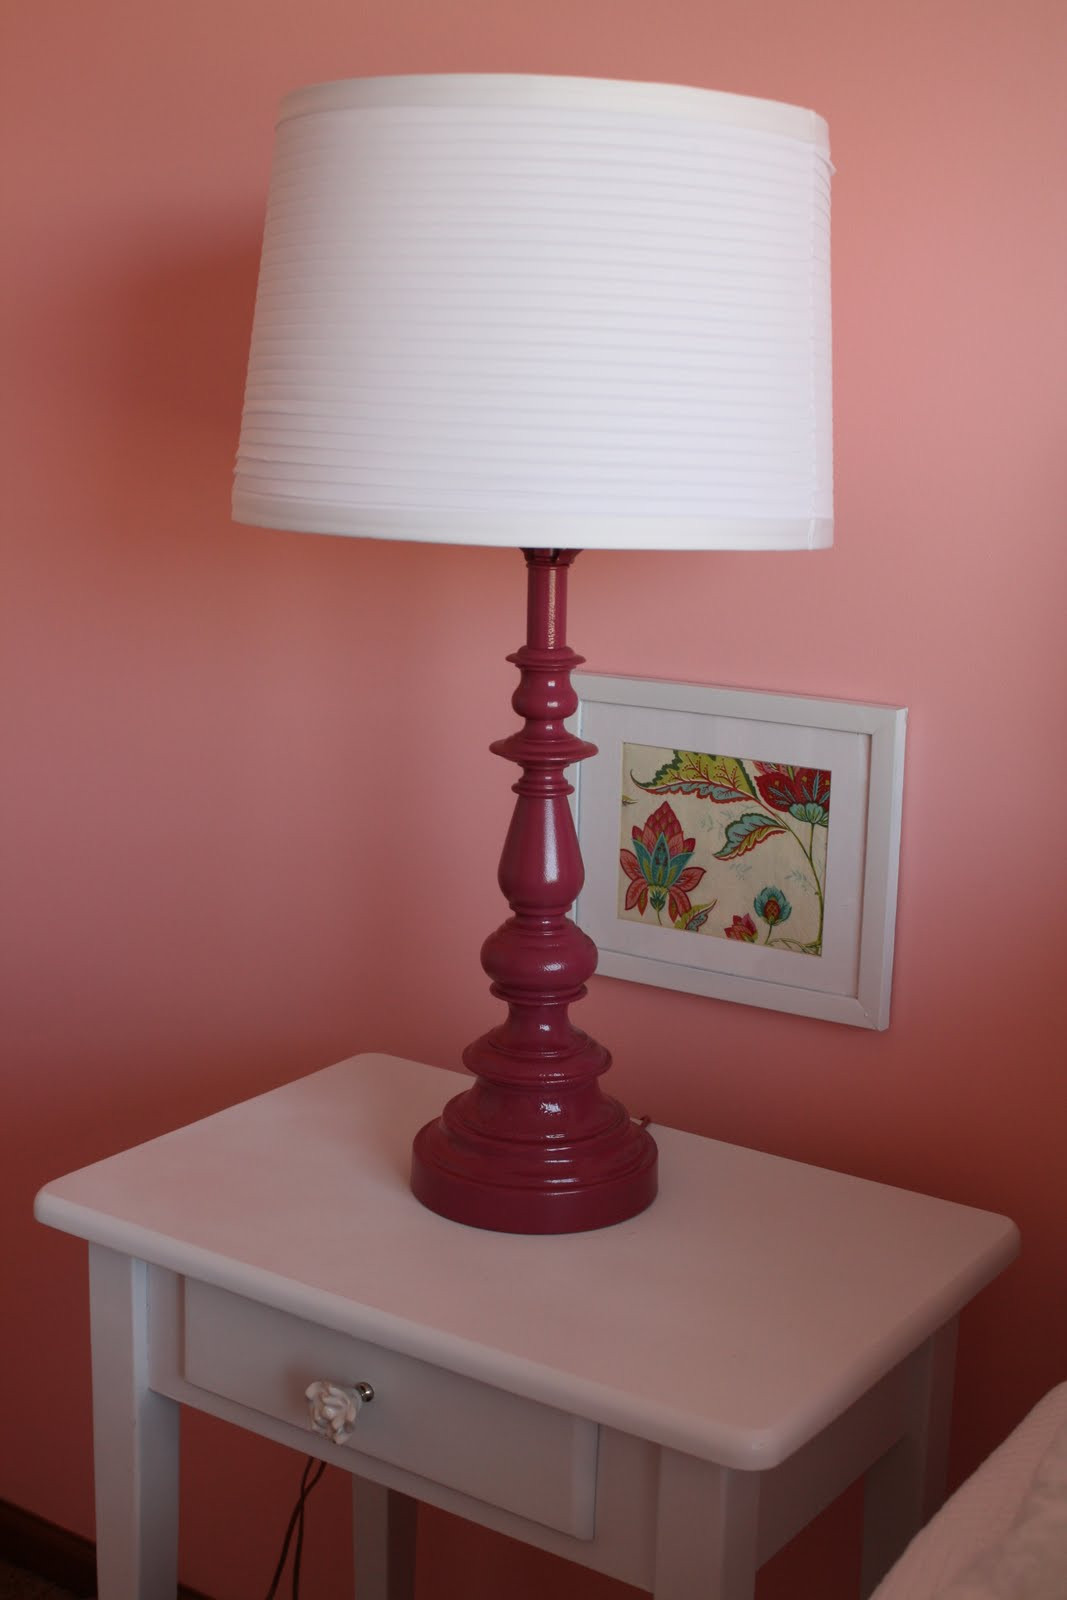 Little Girl Bedroom Lamps
 So Stinkin Cute Glamour Girl Bedroom Lamps and such